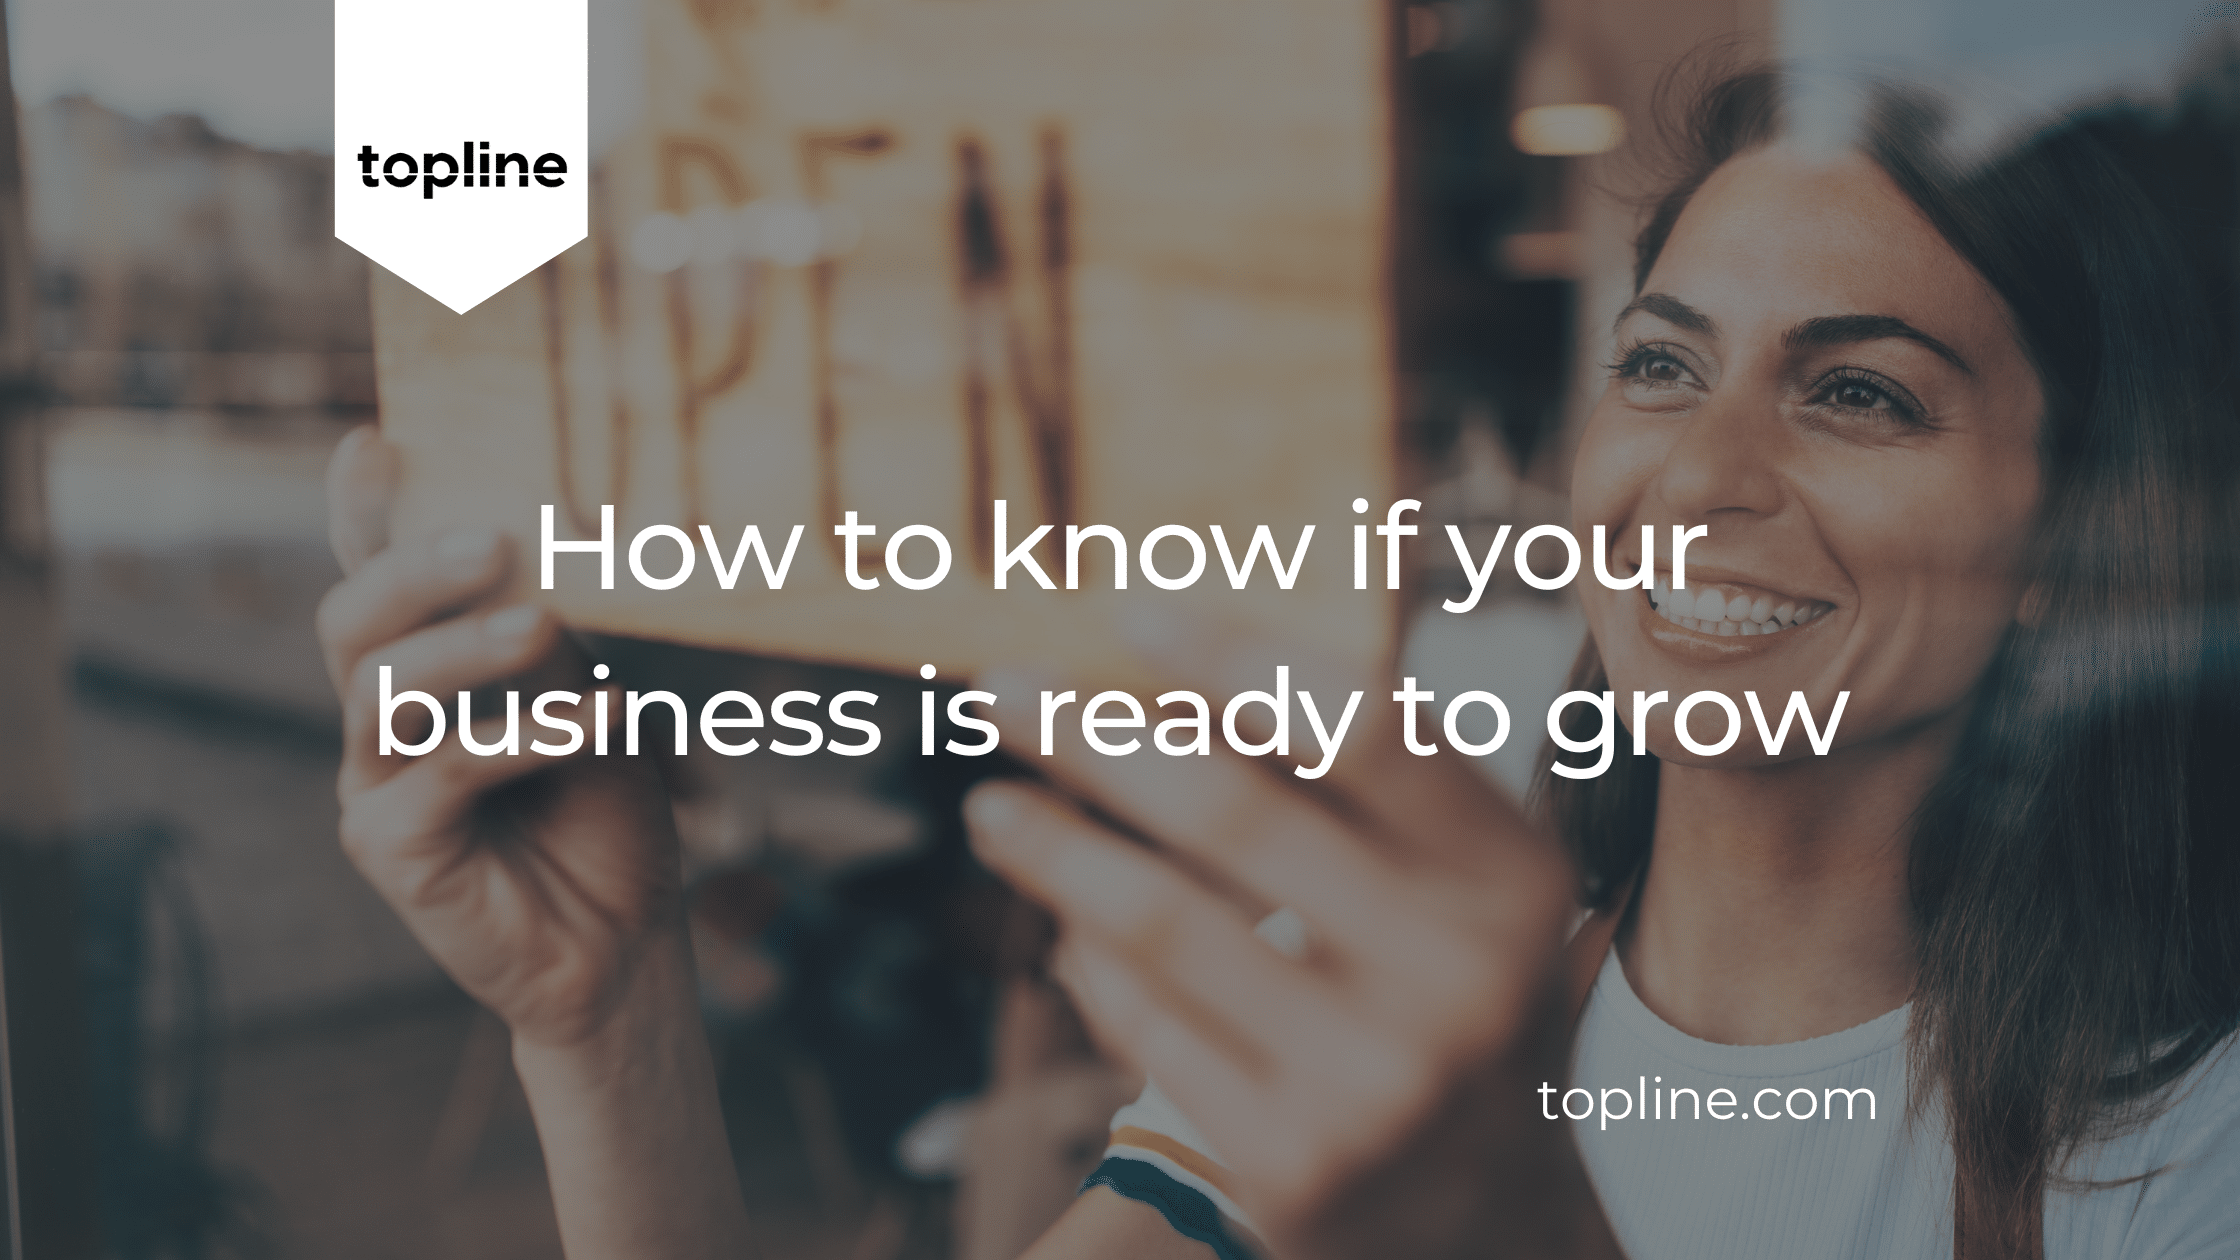 How to know if your business is ready to grow